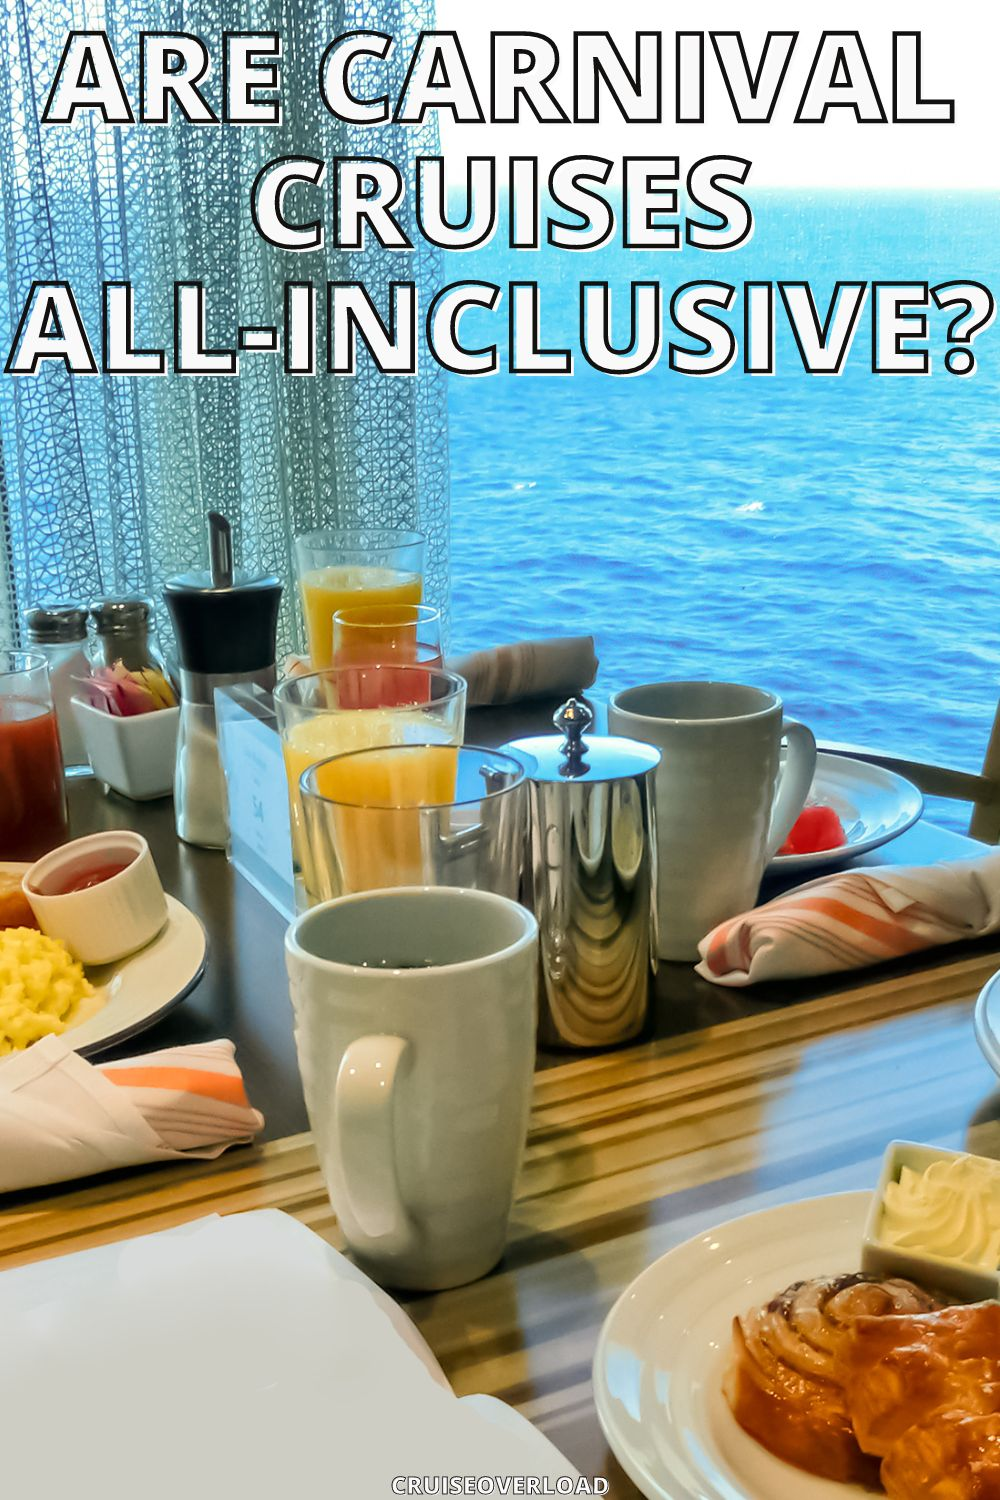 Breakfast spread on a cruiseship with text on top asking 'Are carnival Cruises All Inclusive?"